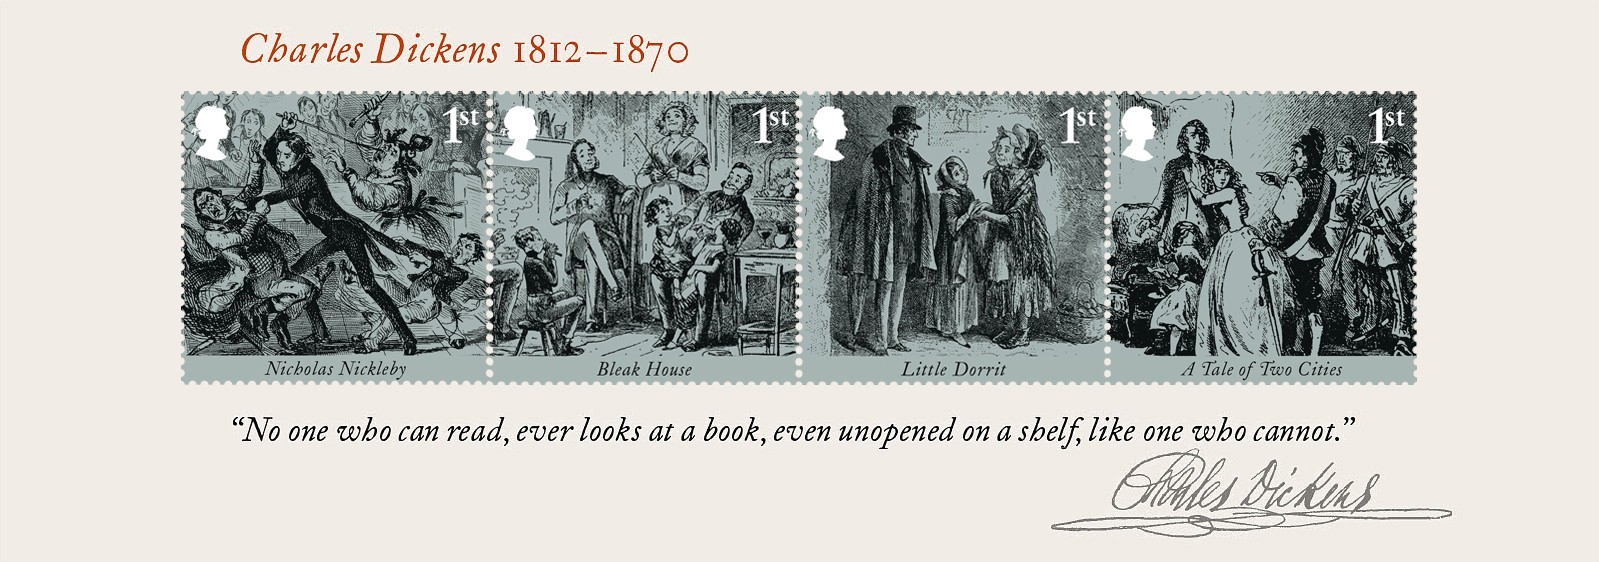 Charles Dickens Bicentenary miniature sheet of stamps showing scenes from Nicholas Nickleby, Bleak house, Little Dorrit and A Tale of Two Cities.